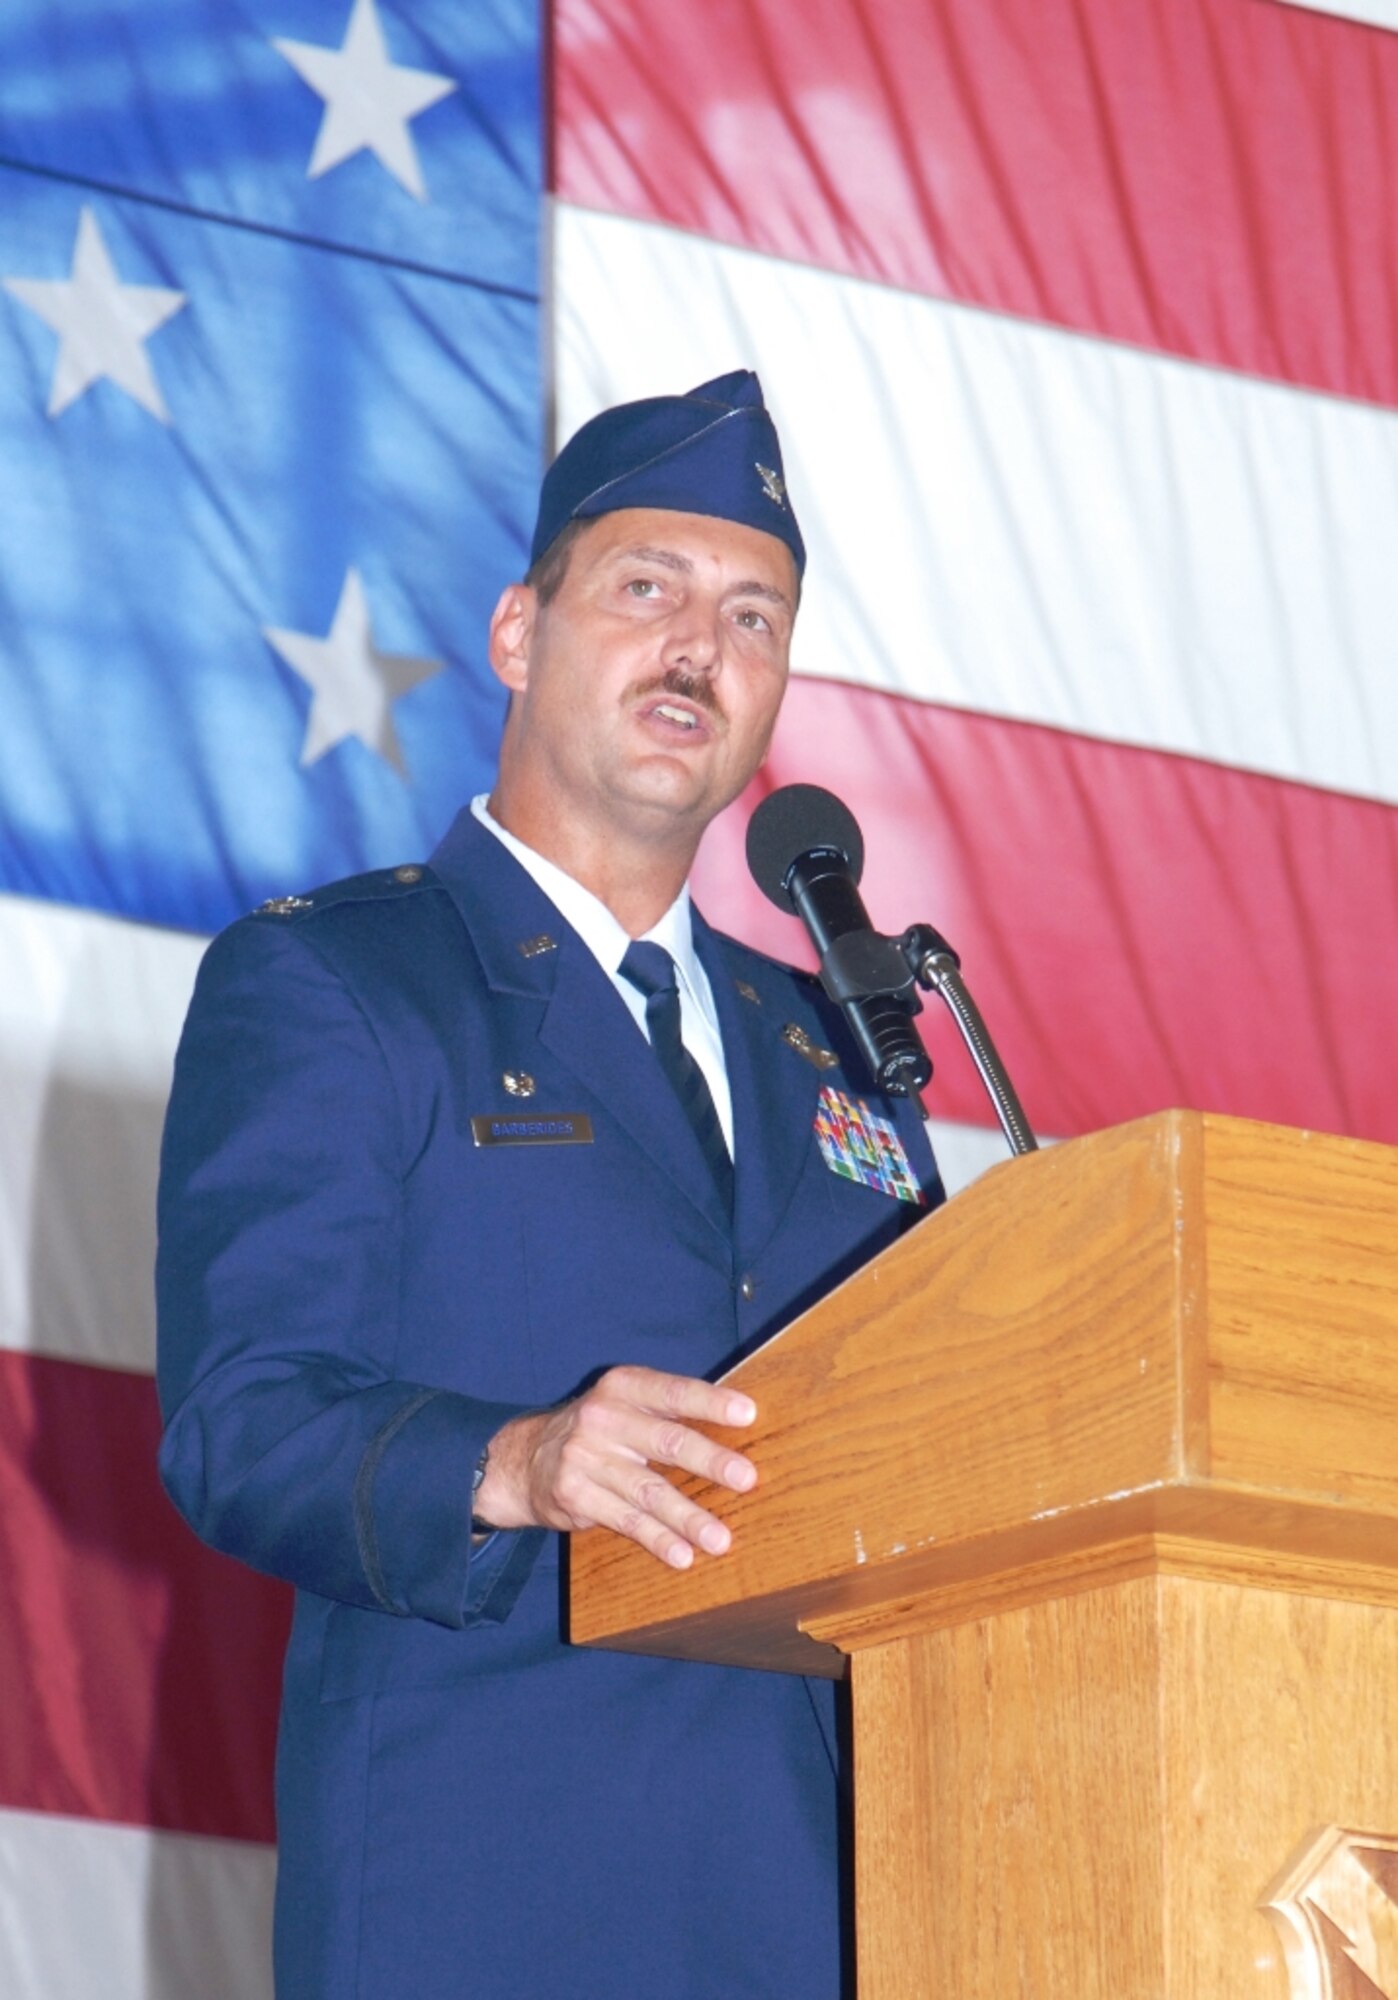 U.S. Air Force Col. Scott Barberides speaks to 101st Air & Space Operations Group (101st AOG) for the last time as the 101st AOG commander during a change of command ceremony held here June 11, 2011.  This was the very first change of command ceremony for the 101st AOG, which was officially activated July 1, 2009. Colonel Barberides served as the first commander of the 101st AOG. (U.S. Air Force photo by Maj. Steve Burke/Released)